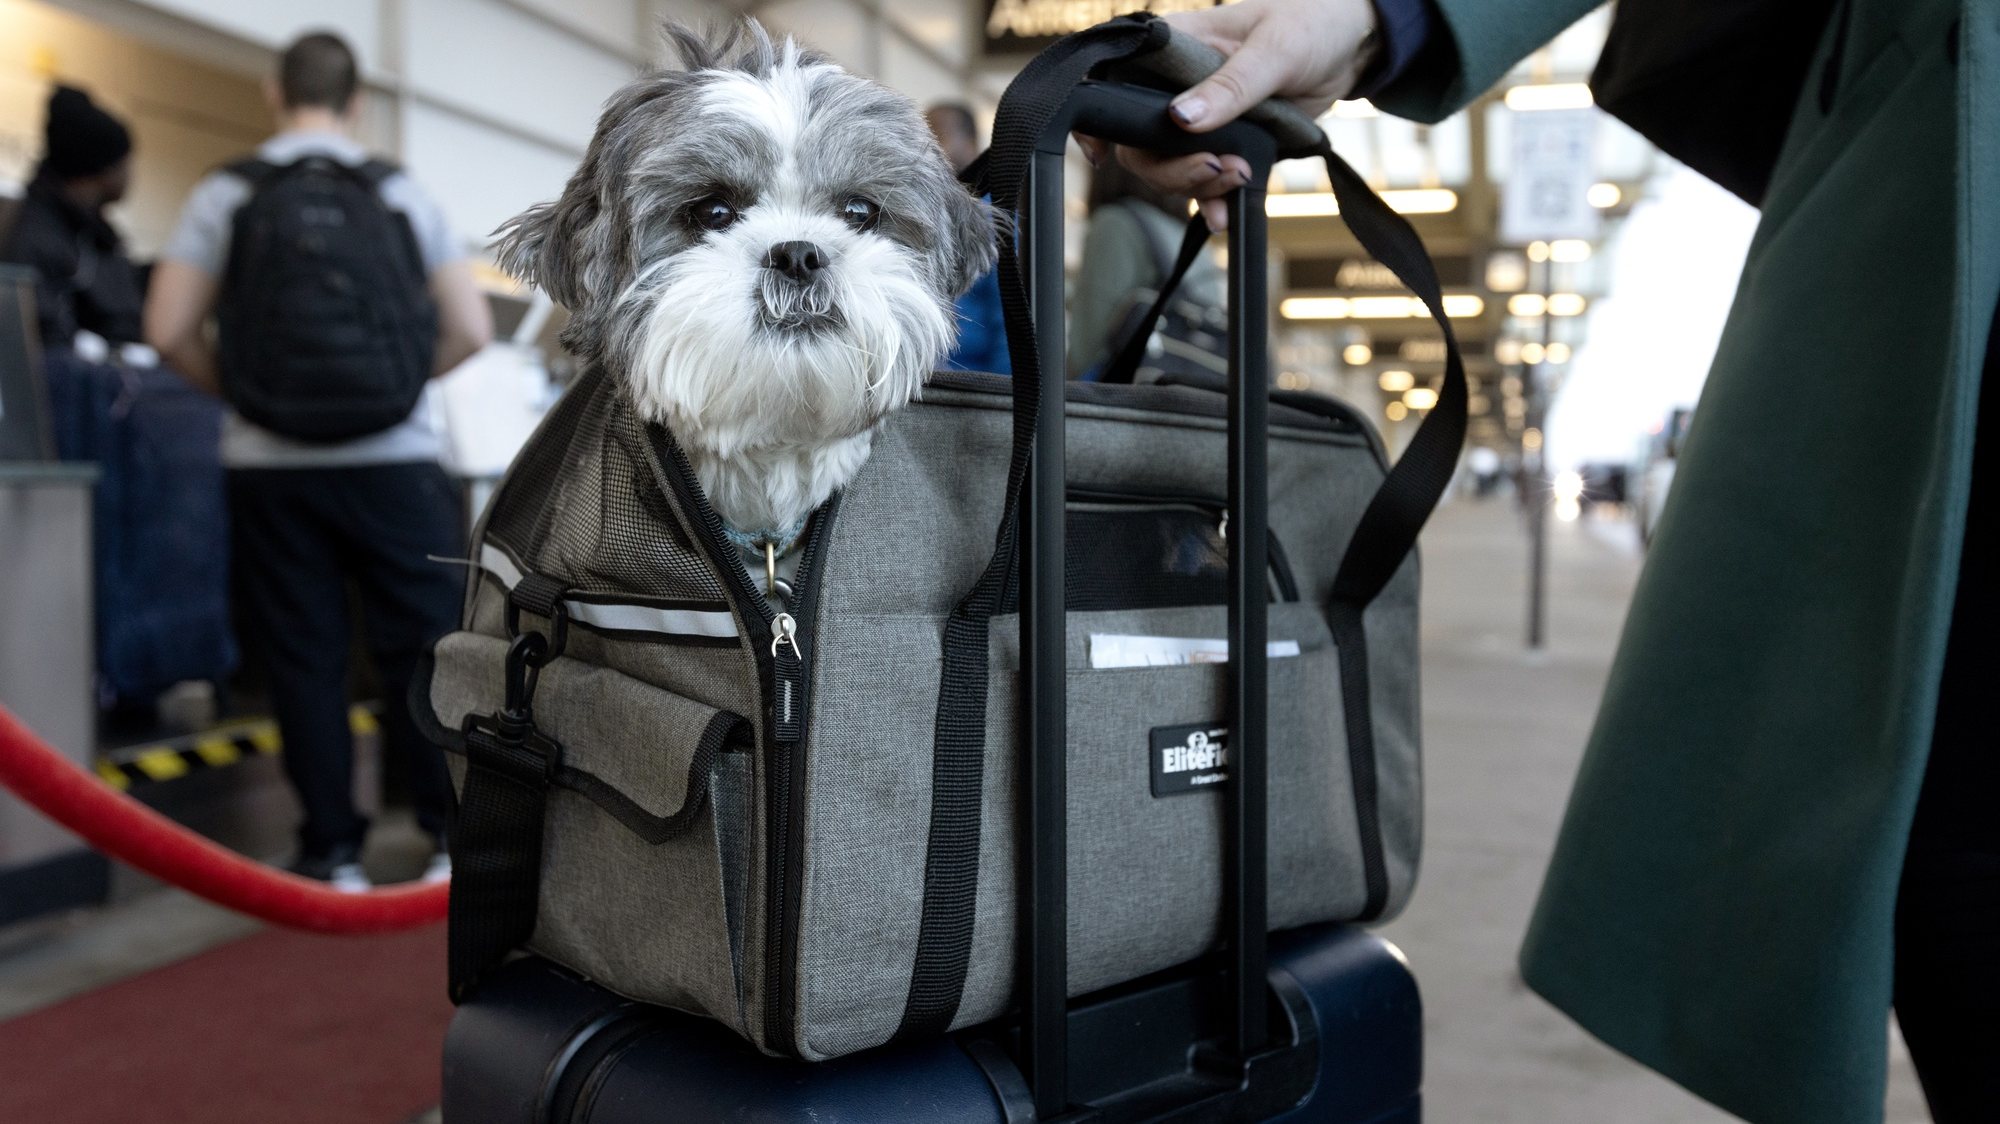 epa10989711 A Shih Tzu dog named Marla is prepared to board a flight along with her owner at Ronald Reagan Washington National Airport on the day before Thanksgiving, in Arlington, Virginia, USA, 22 November 2023. The Thanksgiving Day holiday period is typically the busiest travel time of the year in the United States. About 4.7 million people are expected to fly between 22 November and 26 November, according to AAA (American Automobile Association), making 2023 Thanksgiving air travel the busiest in nearly twenty years due to cheaper fuel and airfare.  EPA/MICHAEL REYNOLDS